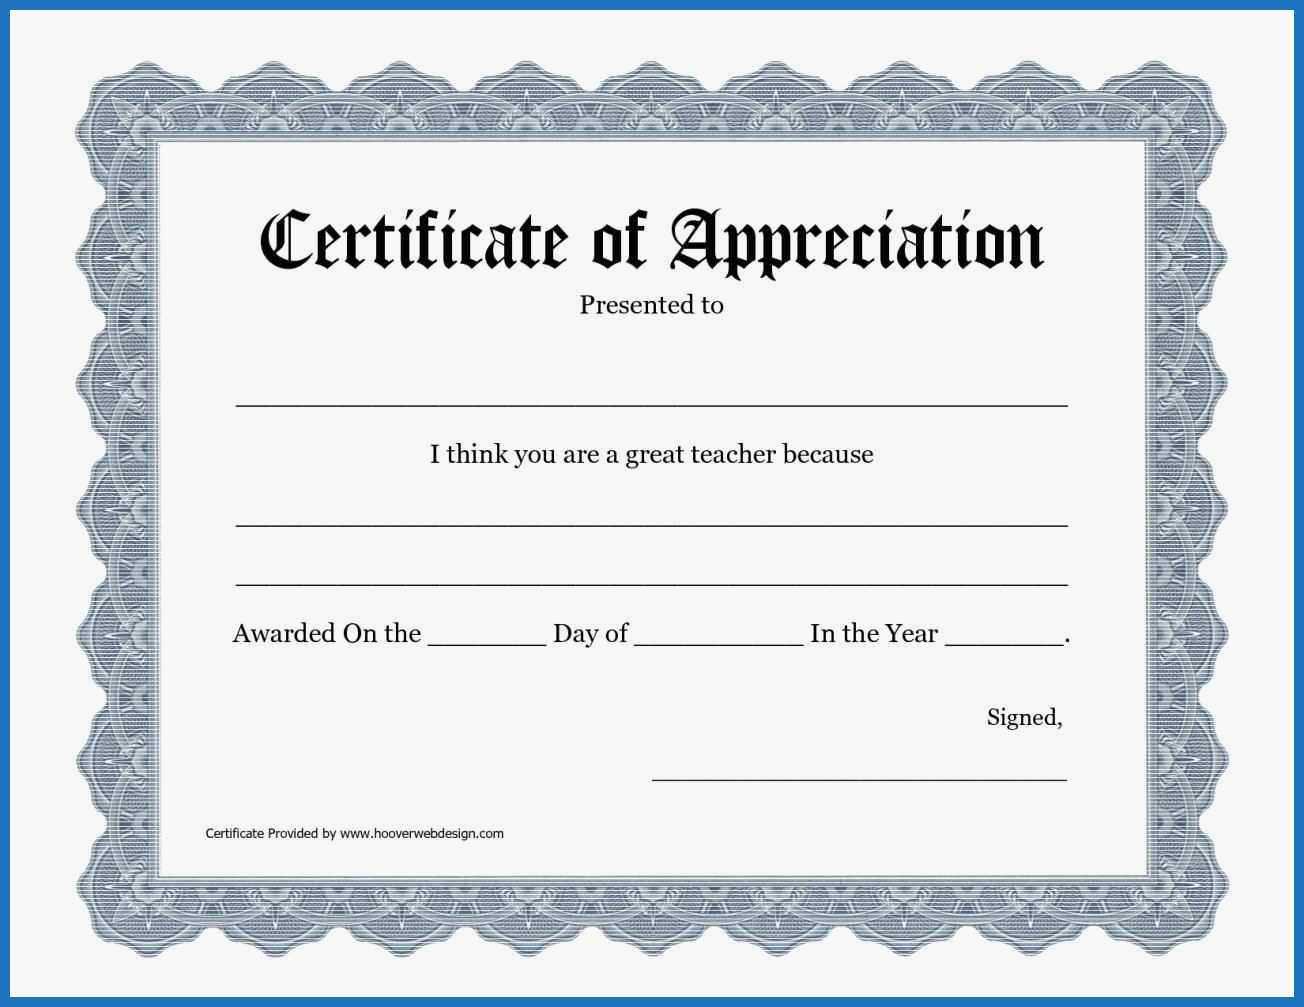 Certificate Templates: Free Template Certificate Of Appreciation Within Free Template For Certificate Of Recognition